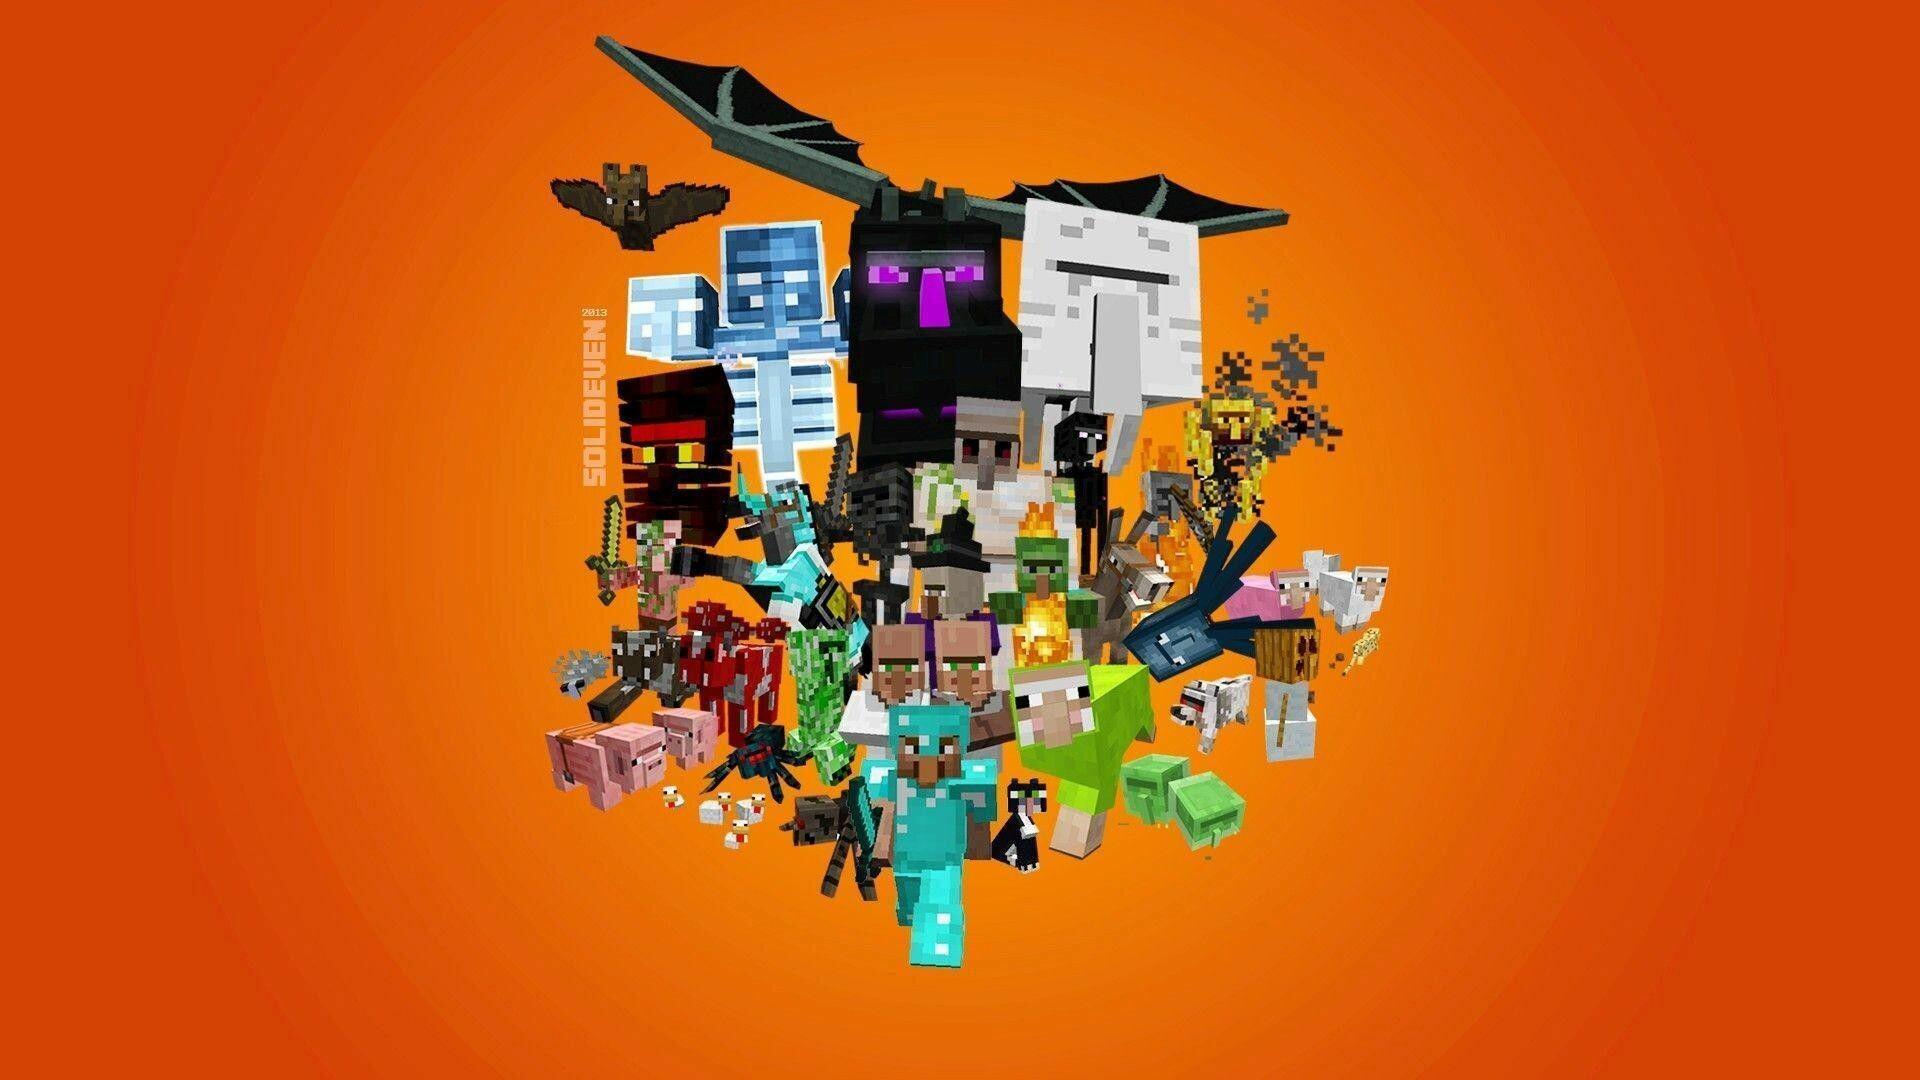 minecraft images wallpaper Wallpapers